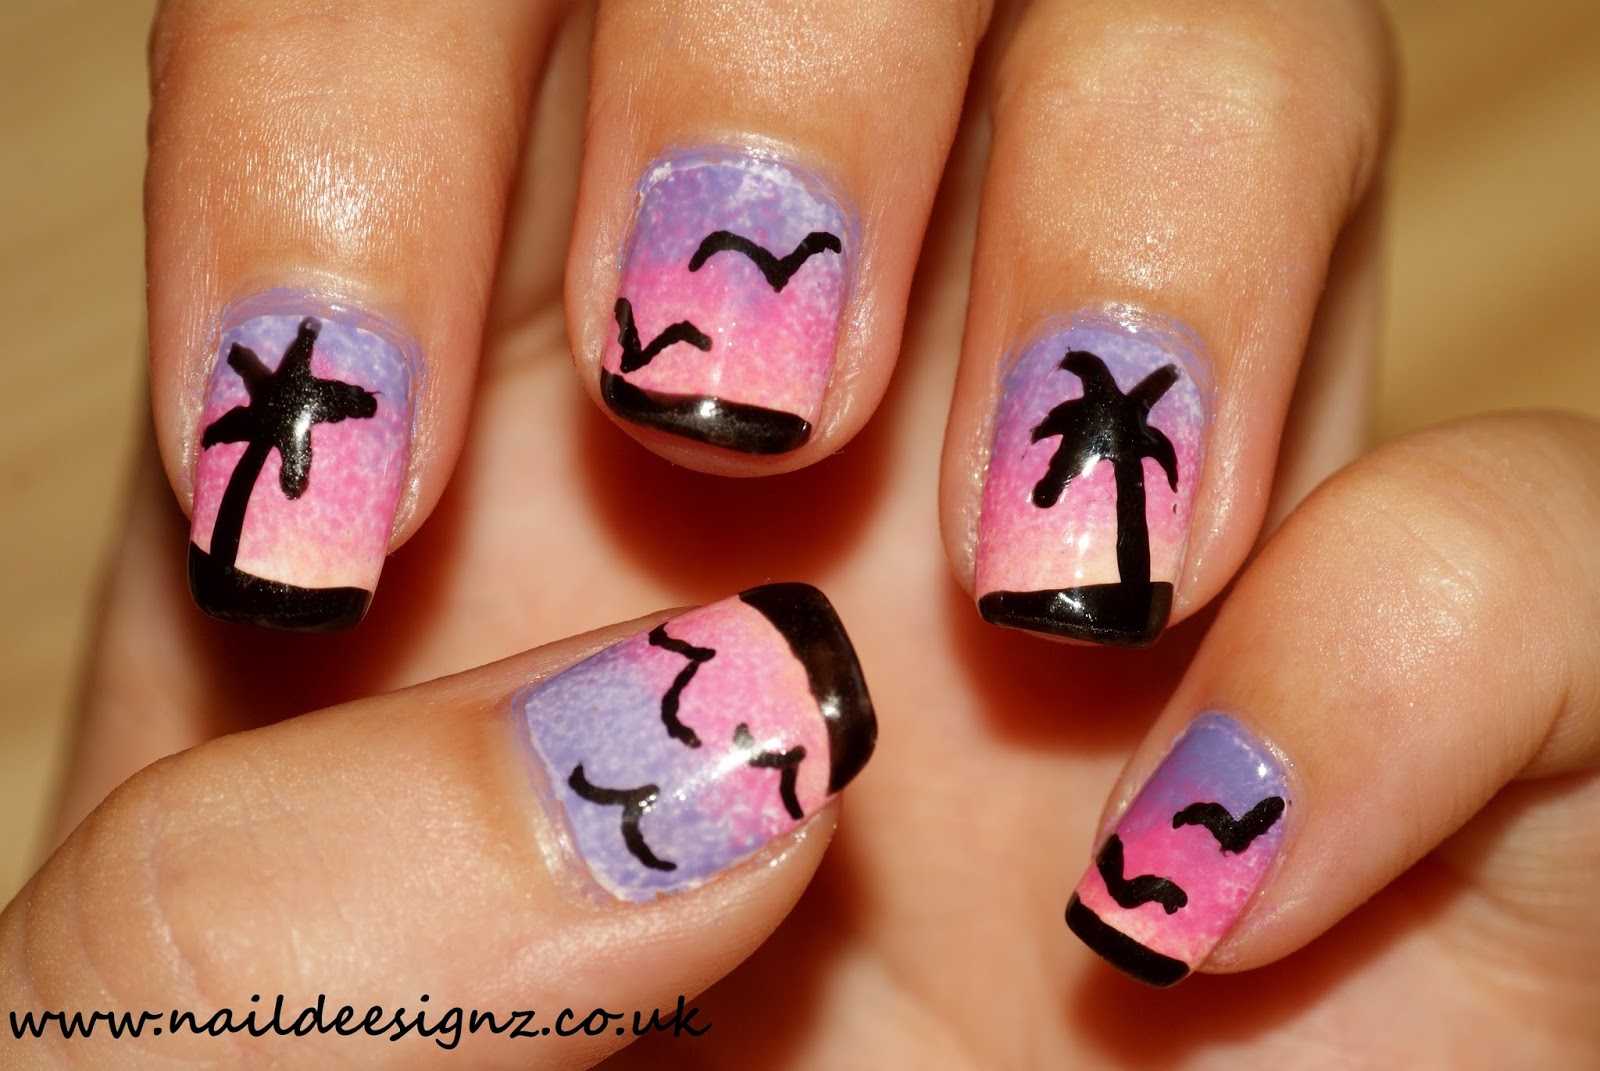 7. Sunset French Manicure - wide 1